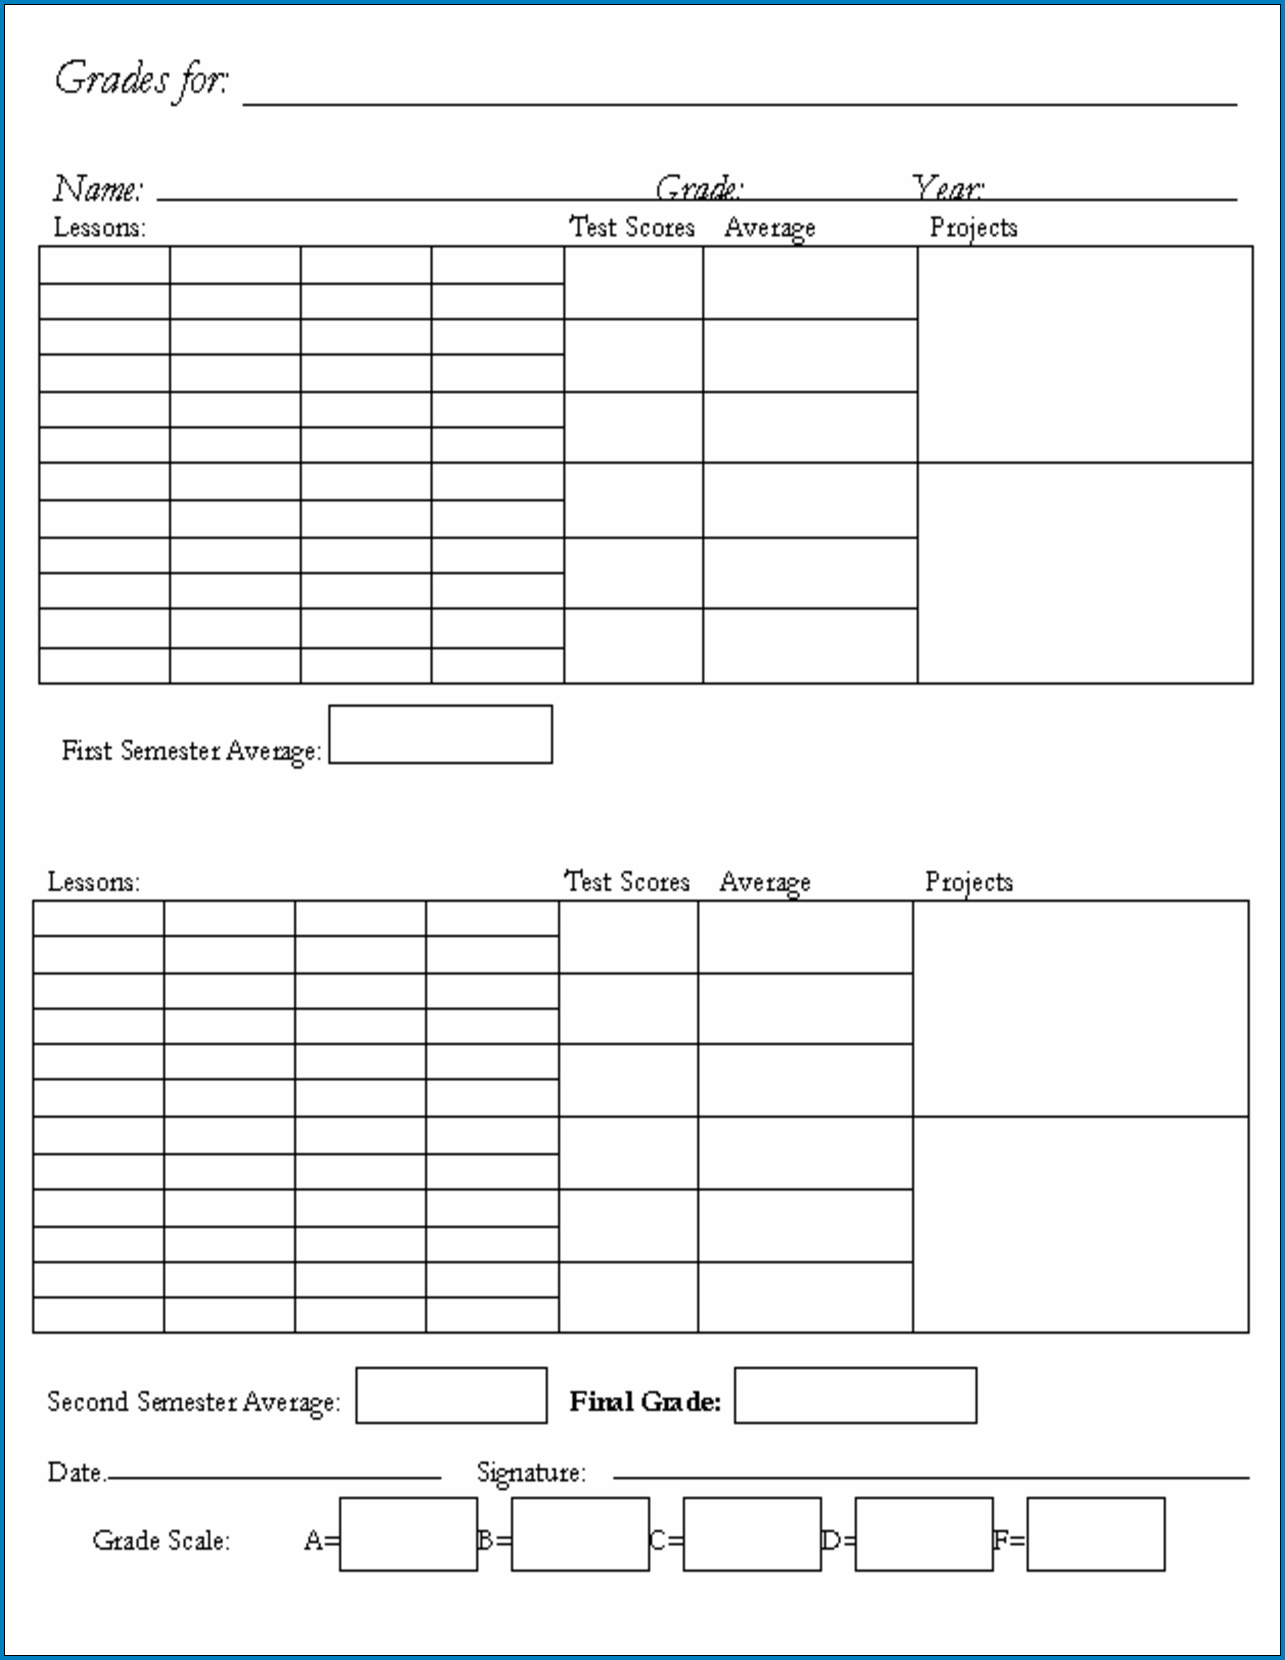 Example of Homeschool Report Card Template